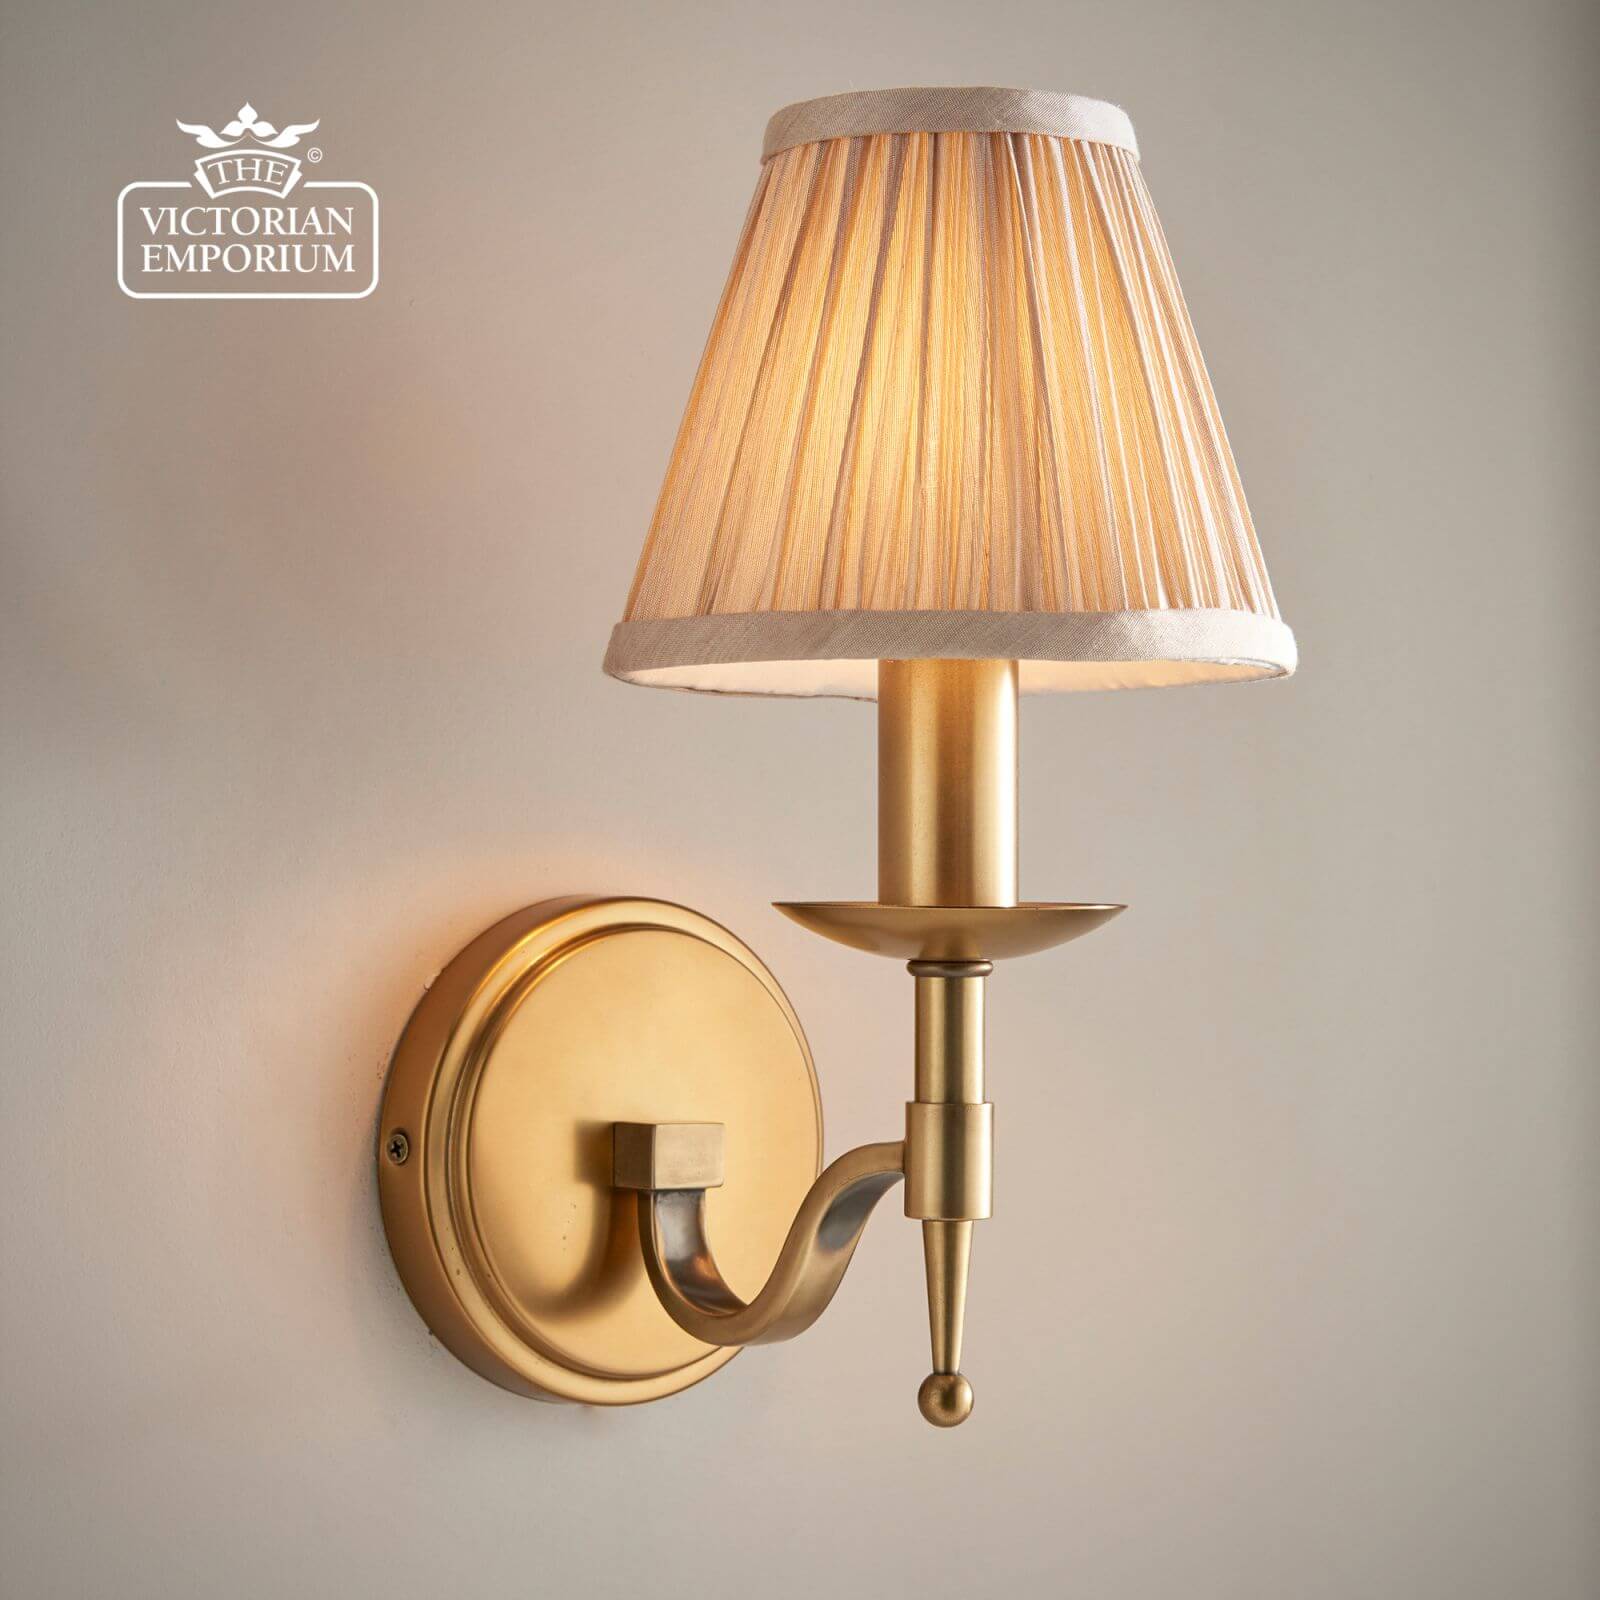 Stanford antique brass single wall light with or without beige shades